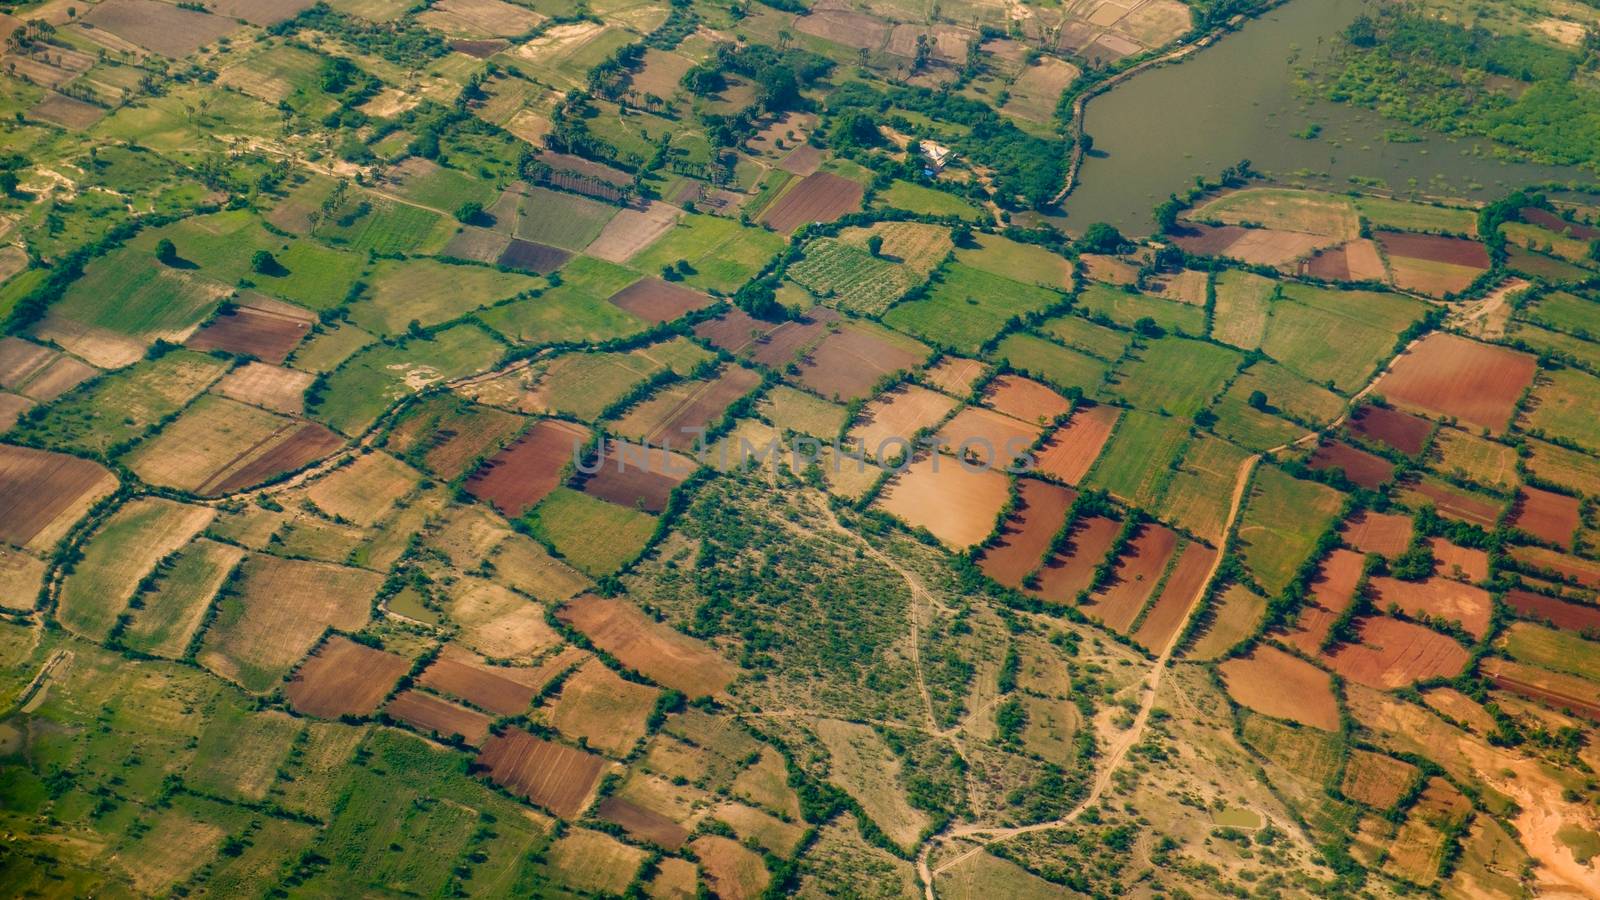 Aerial landscape view of fields and meadows, Myanmar